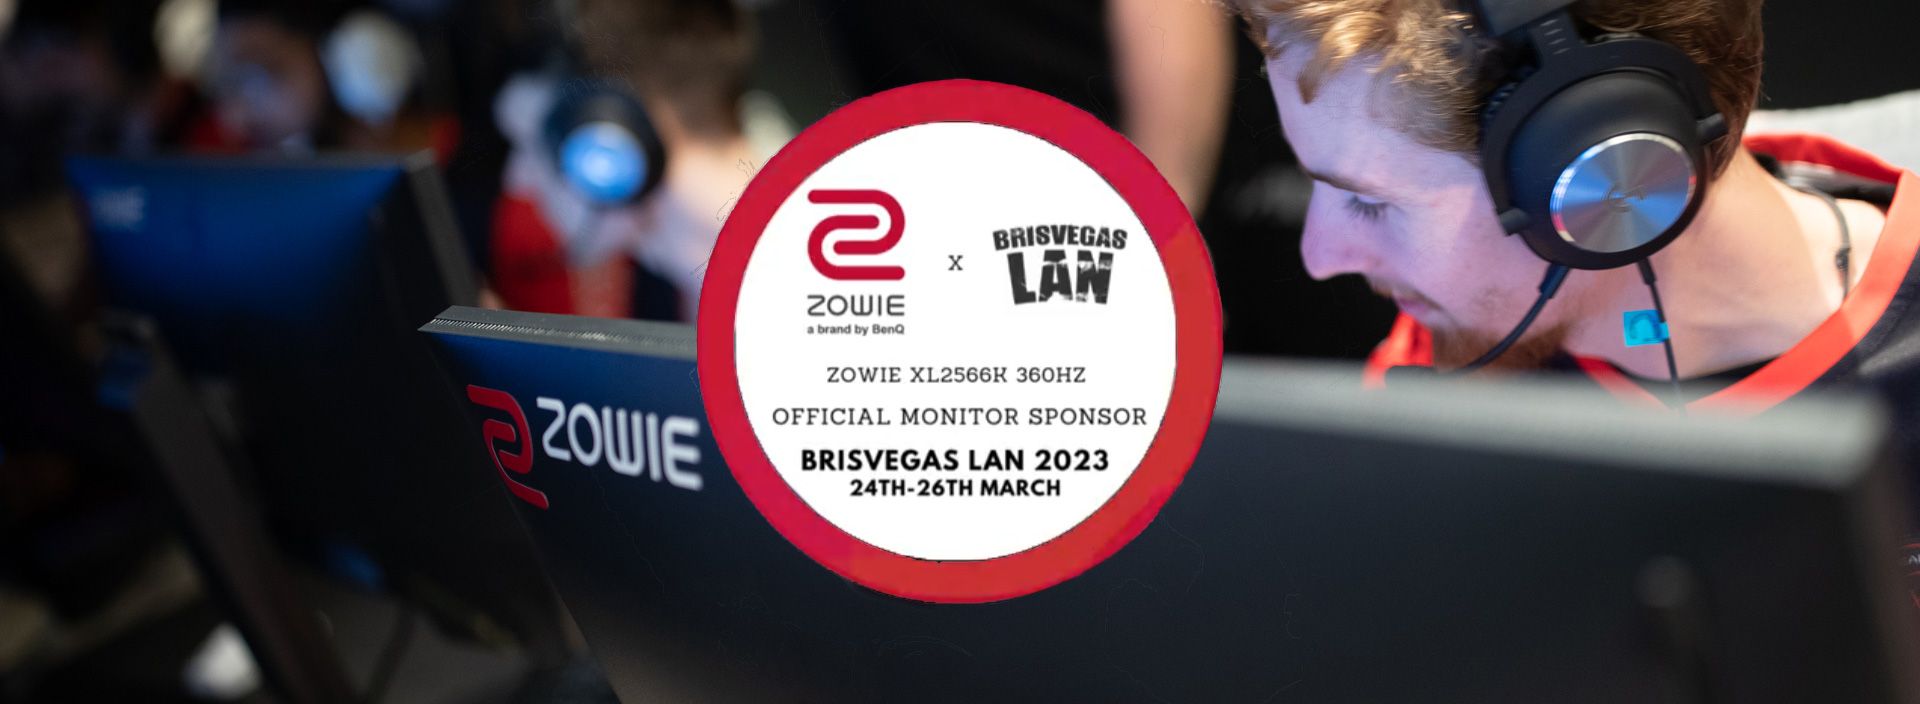 ZOWIE 360hz XL2566K is now the official monitor for BrisVegasLAN 2023